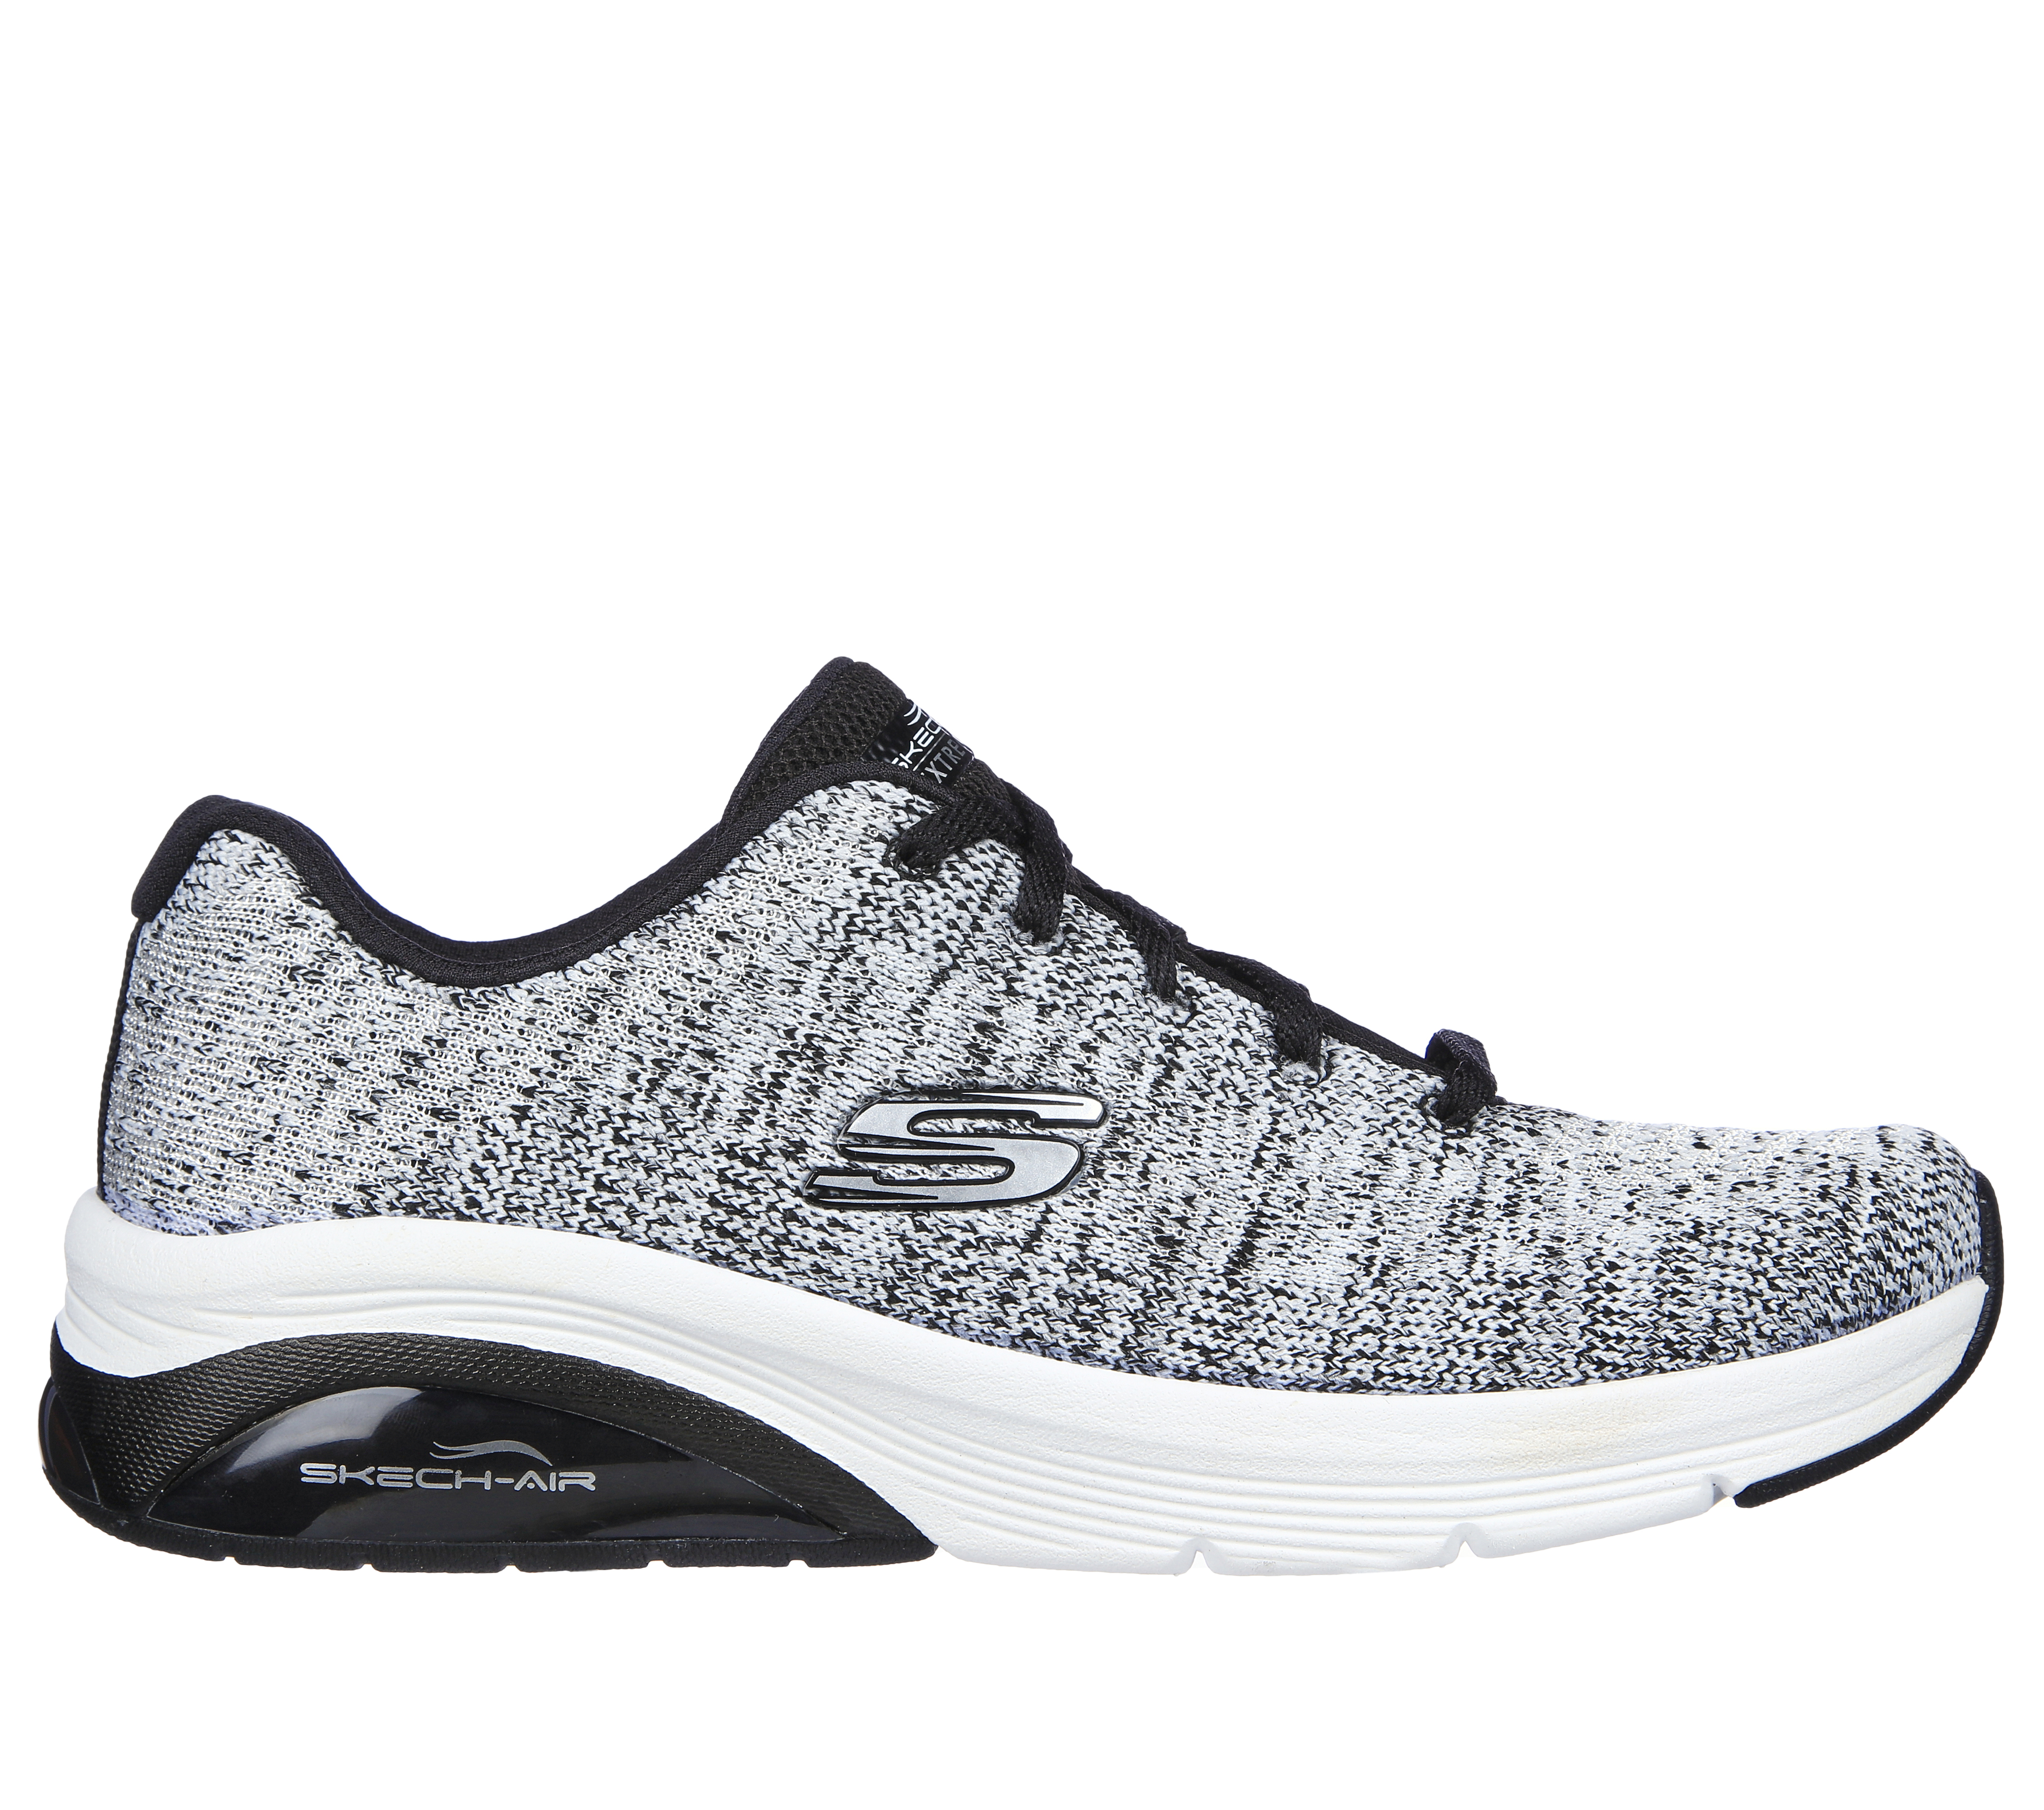 Skech-Air Extreme 2.0 - Classic Vibe | SKECHERS